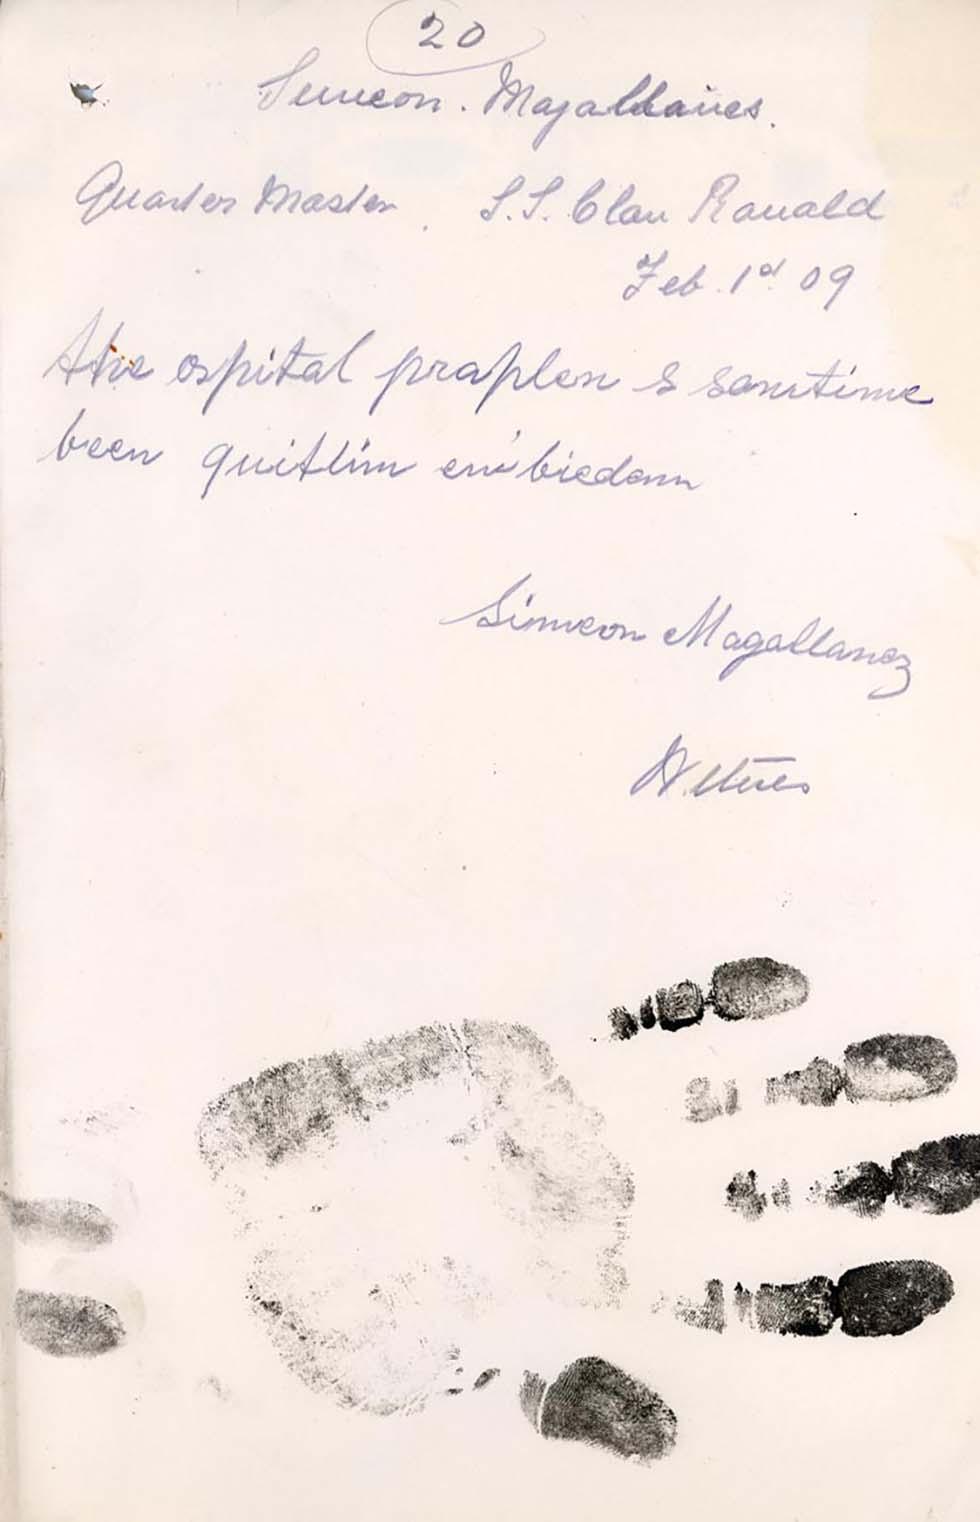 Handprint and dictation test answers of Simeon Magallanez, Quartermaster, SS Clan Ranald.